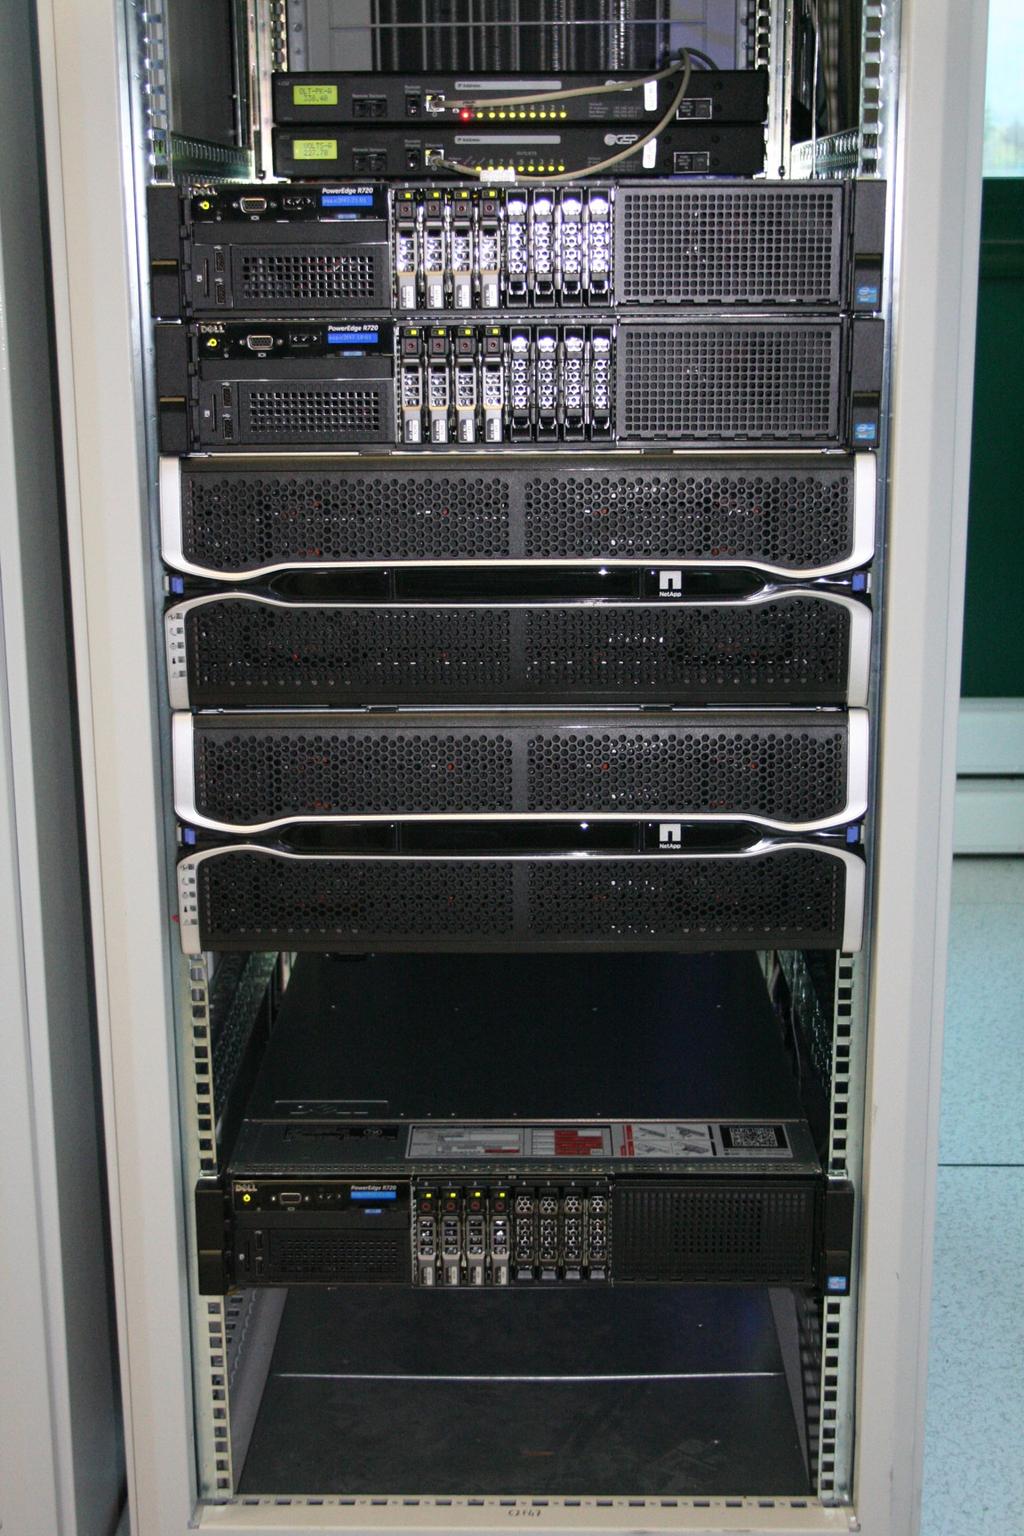 2 servers: 6 DELL R720 2 MDS nodes in active/passive failover mode 4 OSS nodes, each